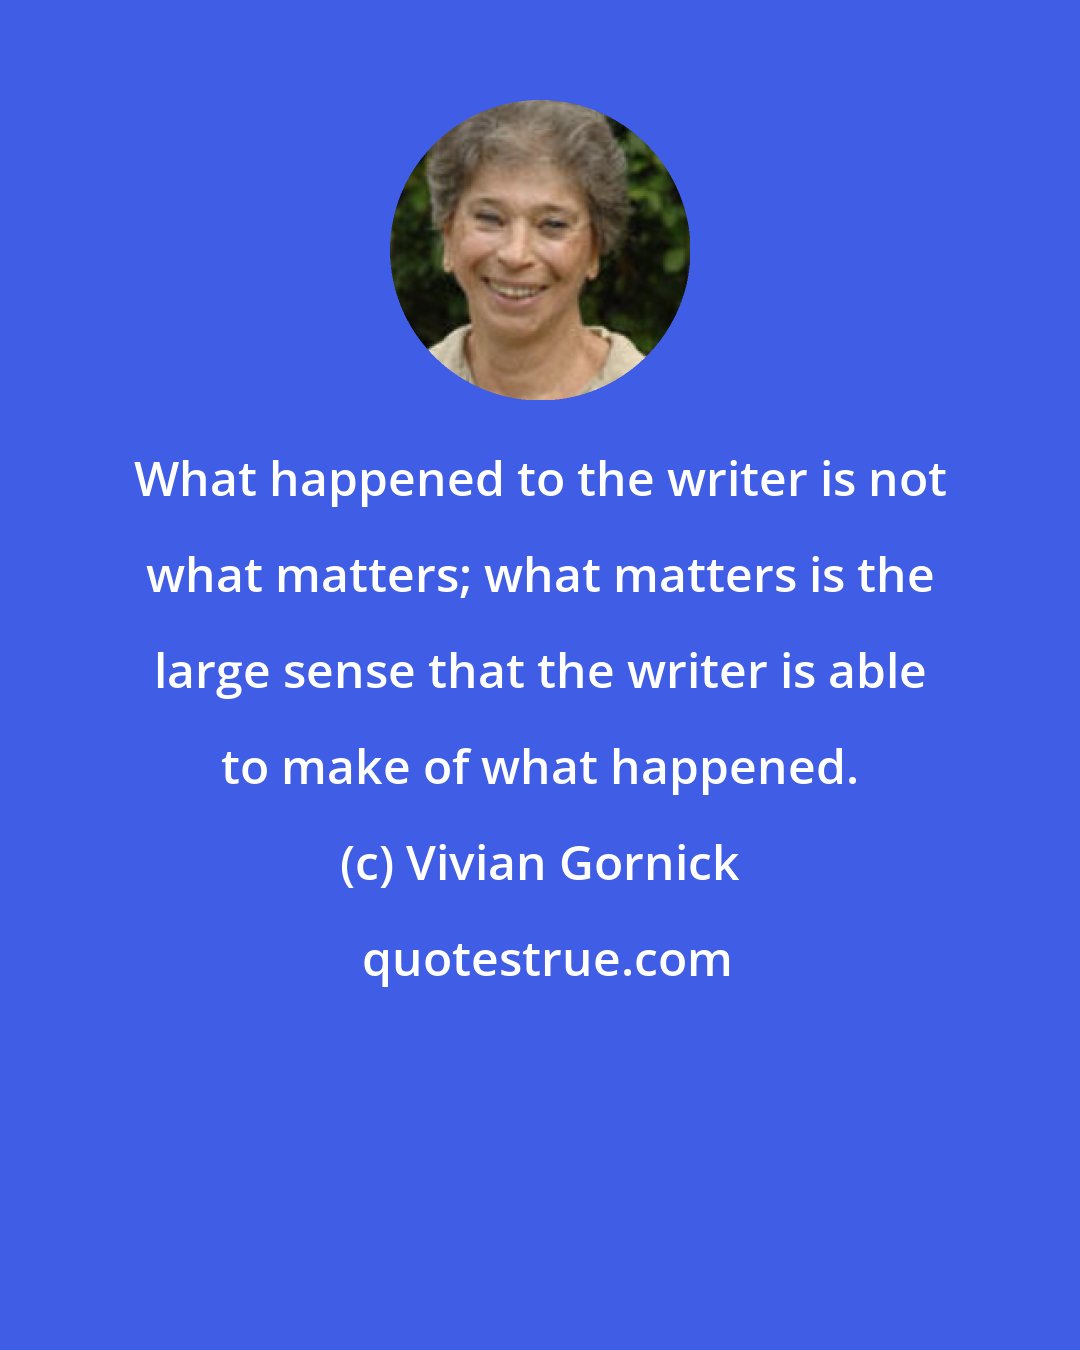 Vivian Gornick: What happened to the writer is not what matters; what matters is the large sense that the writer is able to make of what happened.